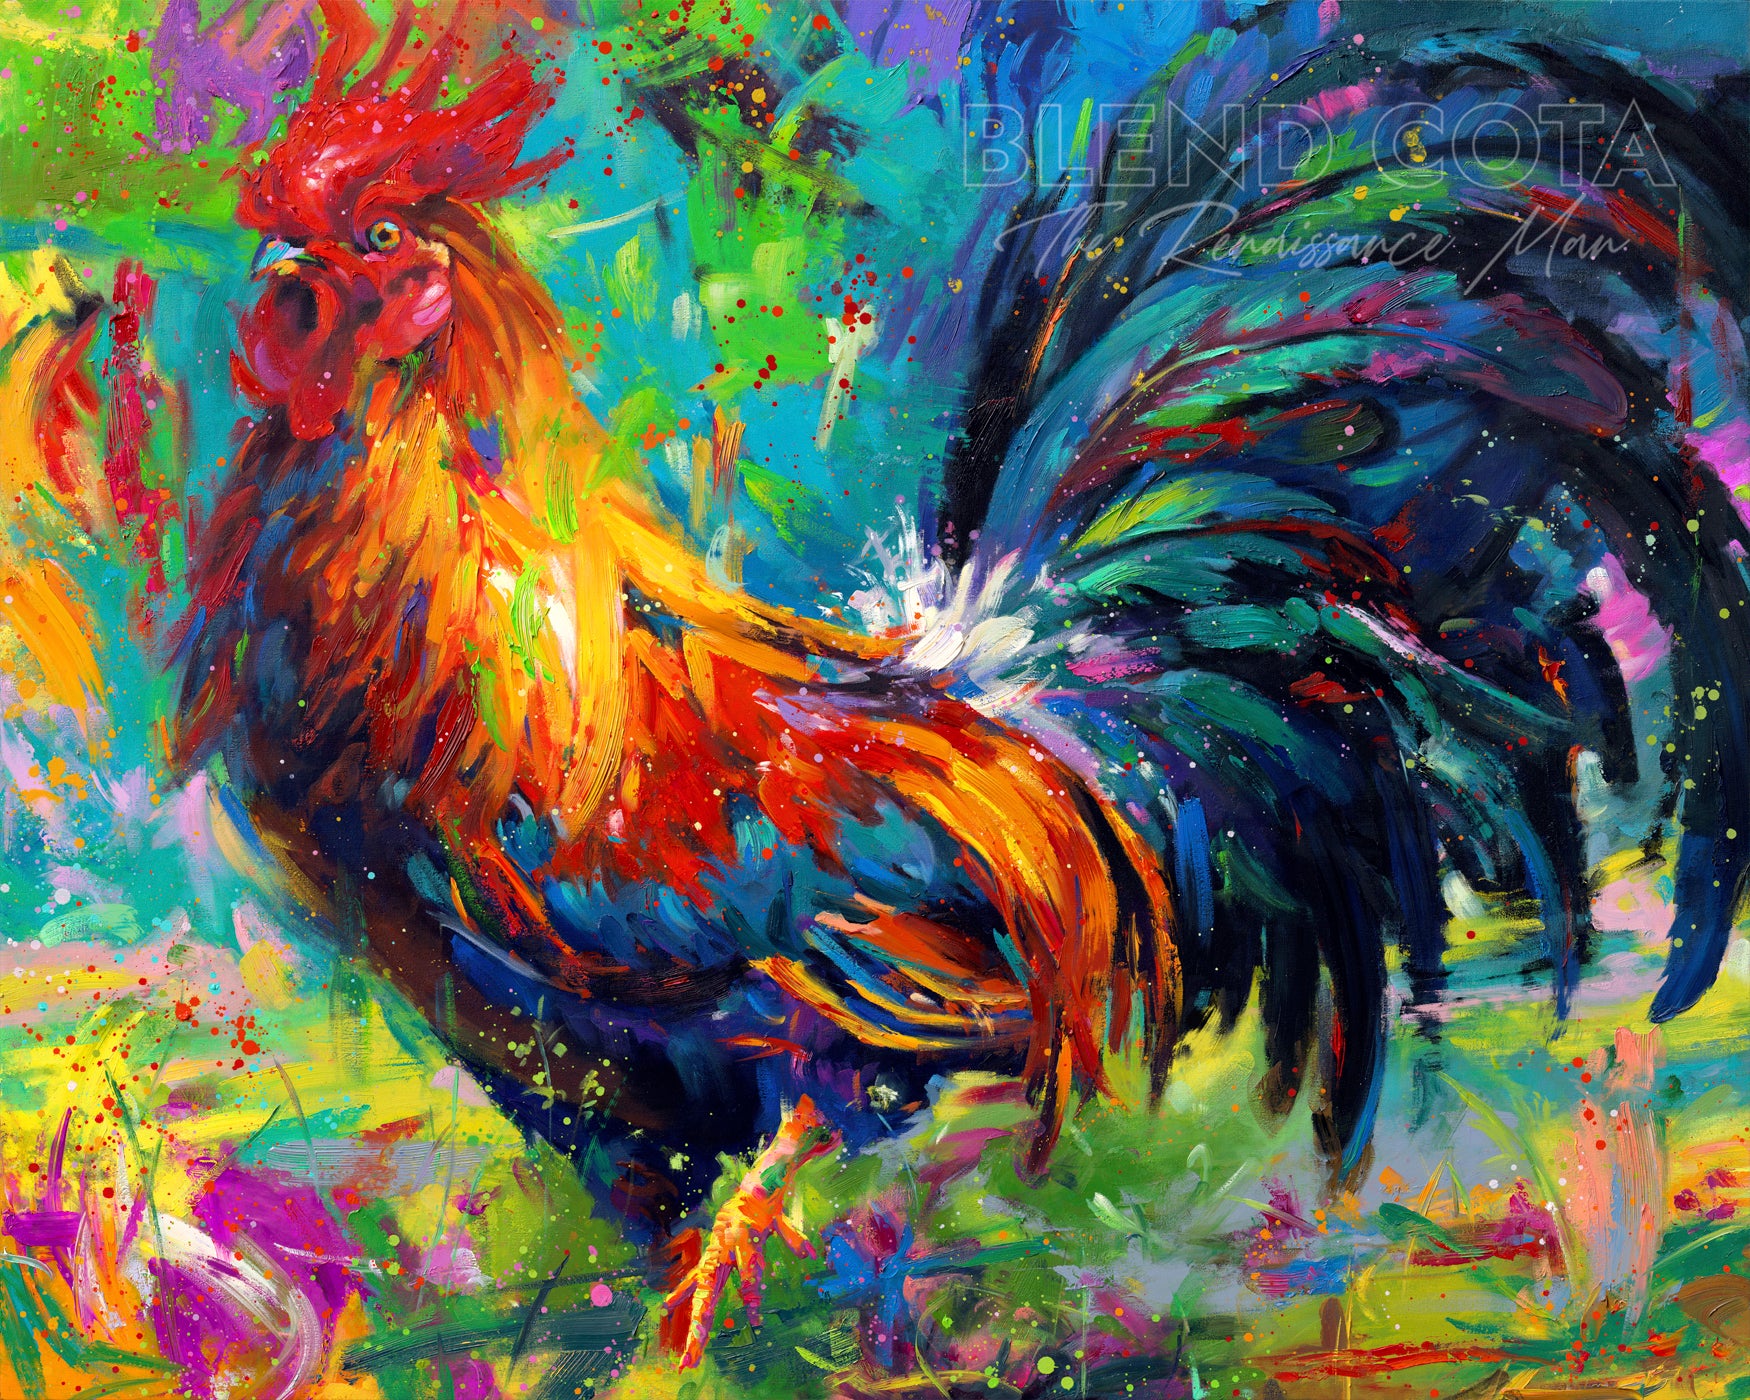 ​The Gallic Rooster, a symbol of French colors, culture and history, is a limited print with playful strokes of passion and energy to represent this beautiful bird's courage, determination and virility when defending the flock. Every morning, the cry of the rooster is a call to the victory of light conquering darkness and good triumphing over evil. Vive la France, vive la Liberté, vive Le Coq!